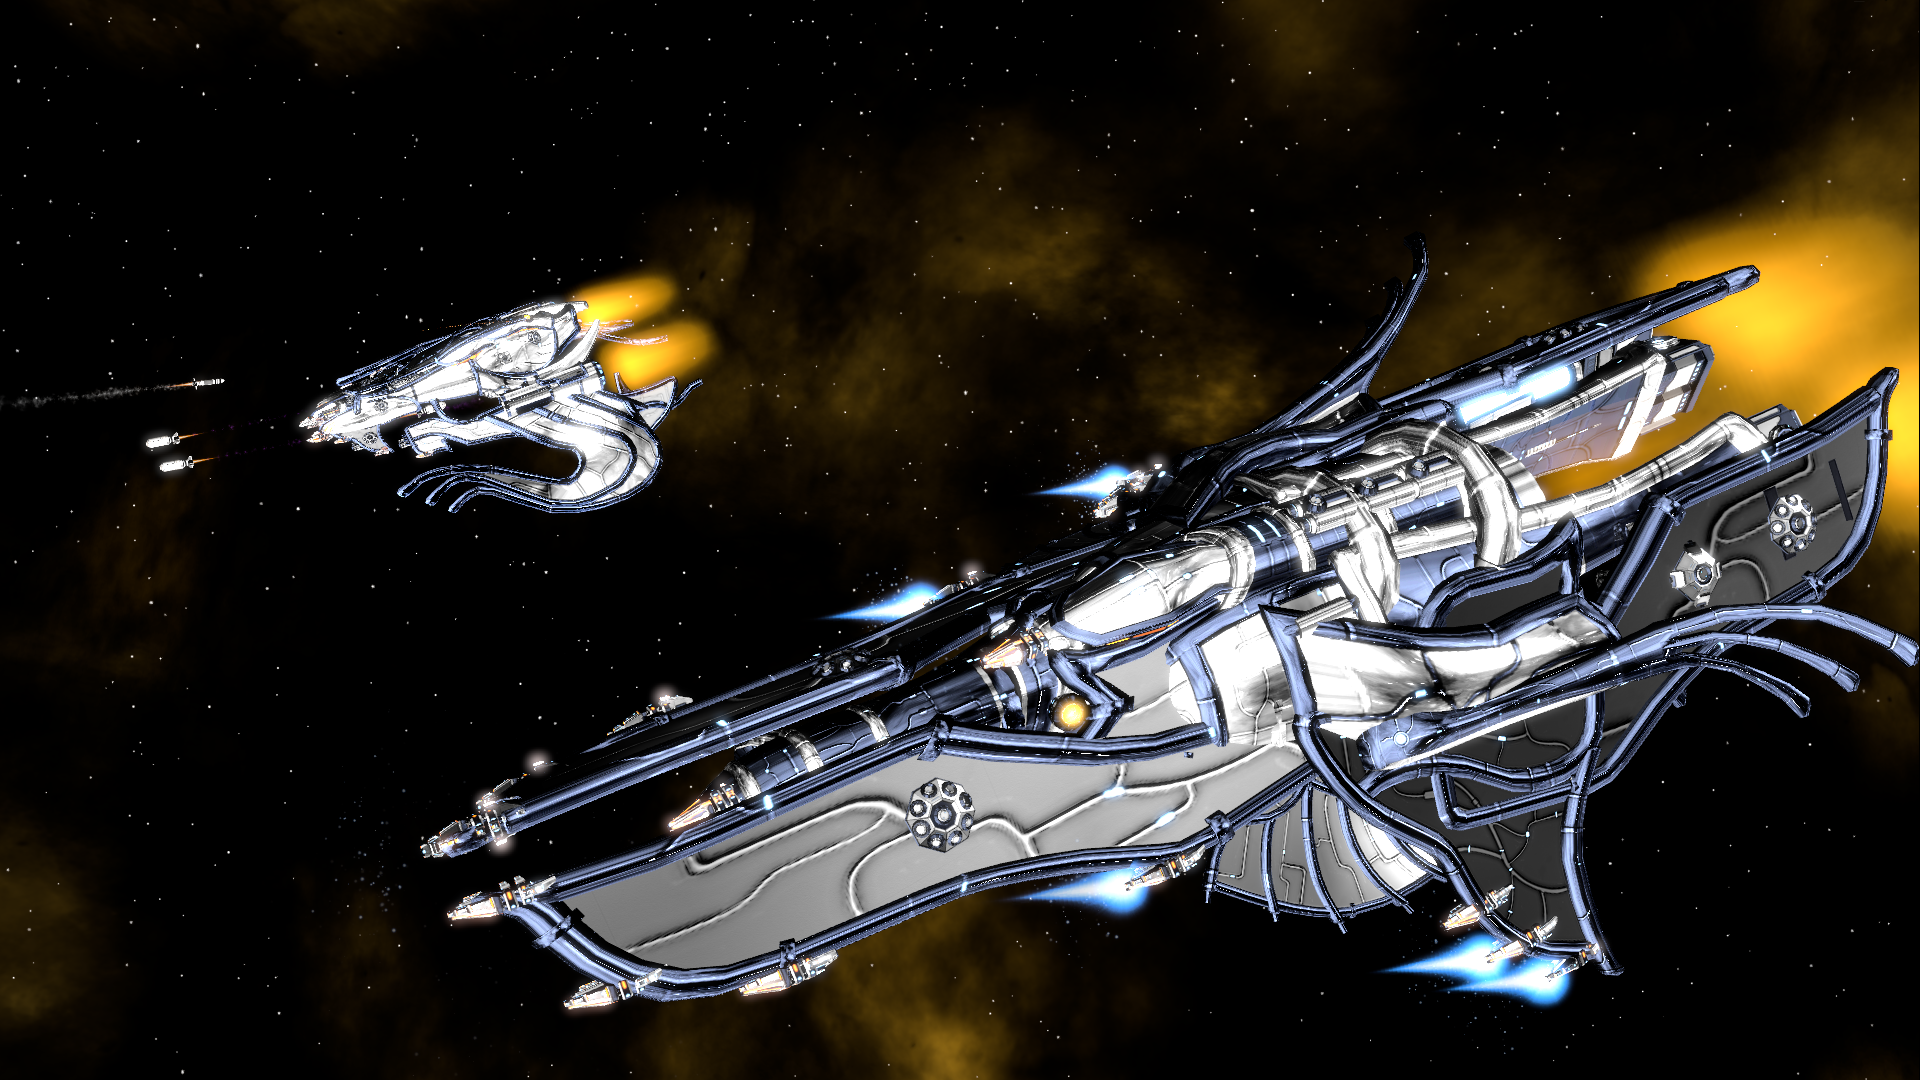 Galactic Civilizations III Interview – The Process Behind Creating a Superior 4X